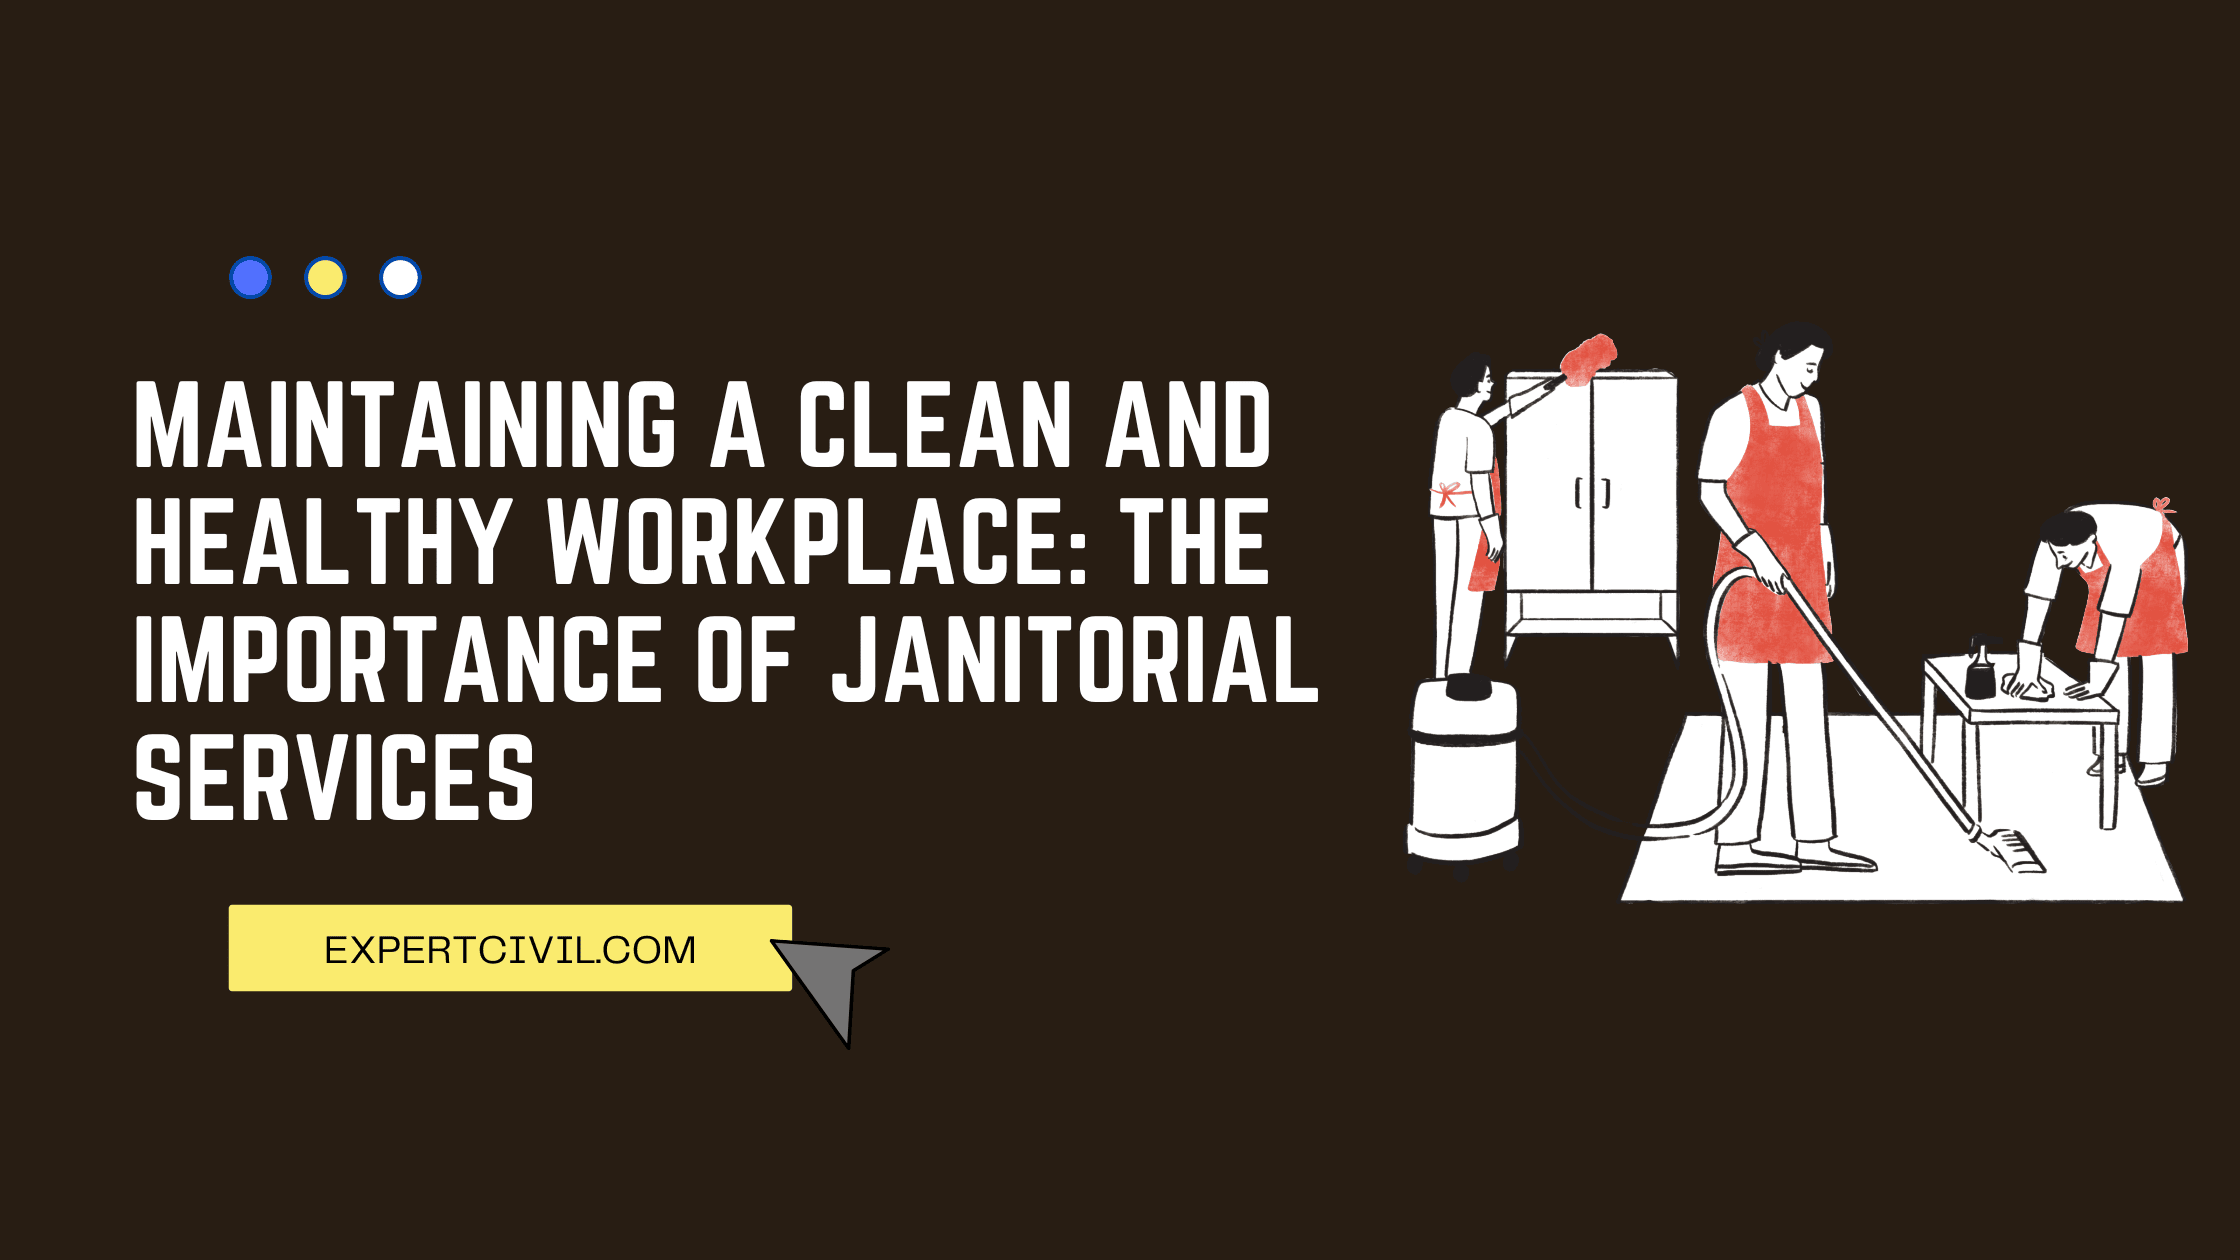 Maintaining a Clean and Healthy Workplace: The Importance of Janitorial Services